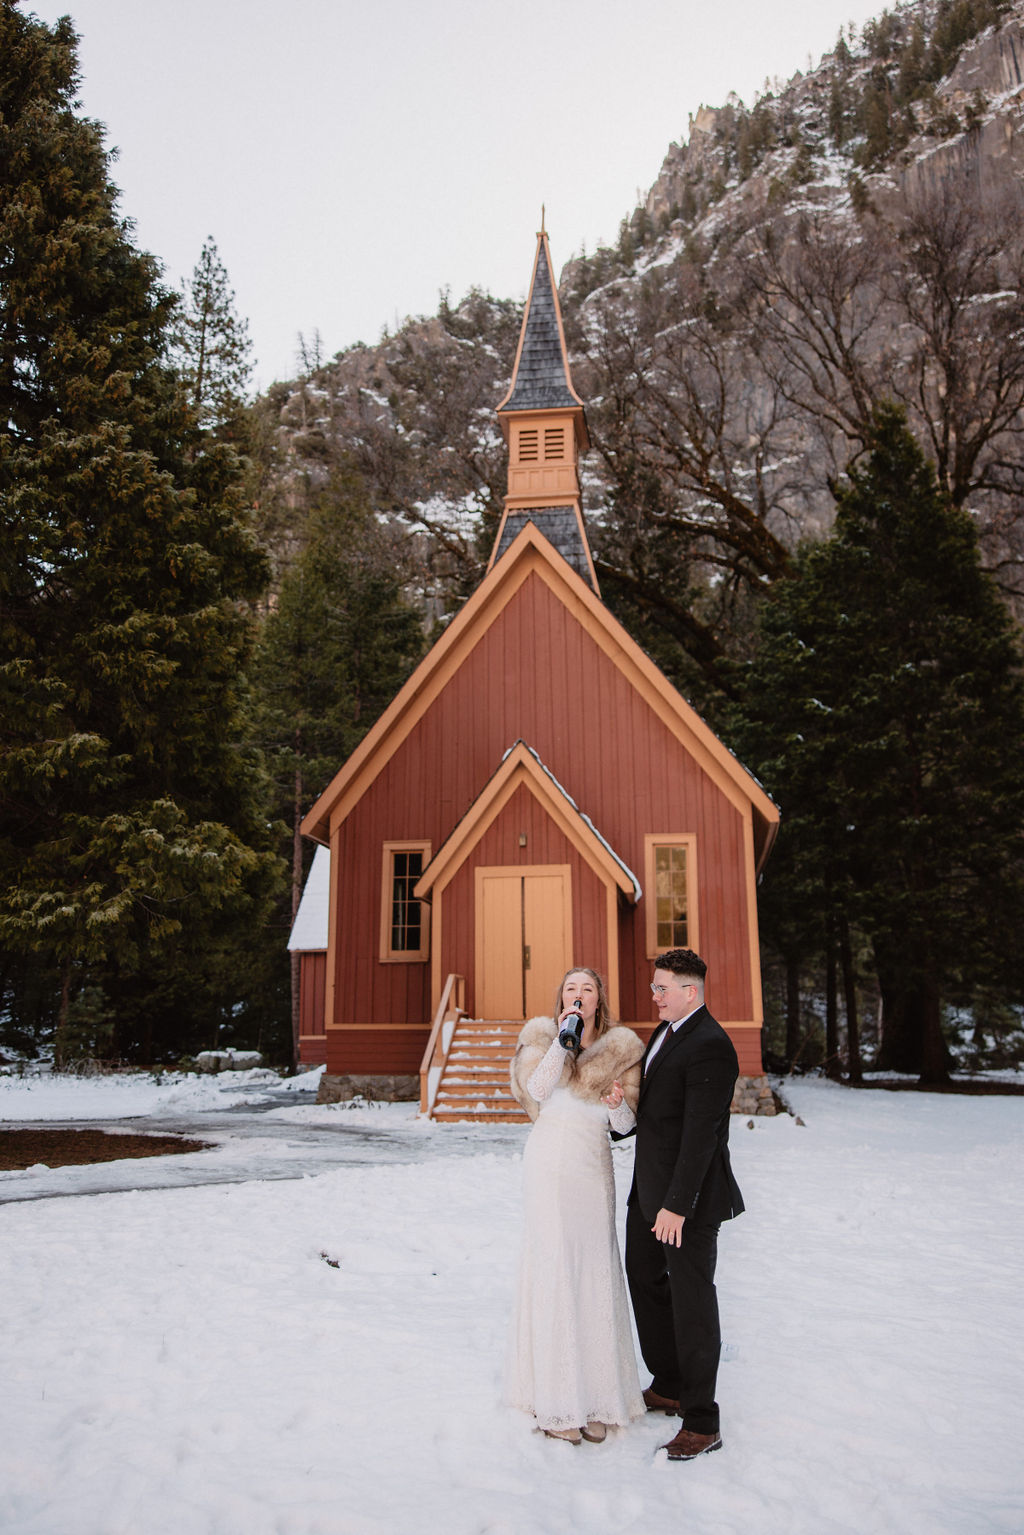 Couple embracing in the snow in front of a quaint red church while popping champagne at Yosemite National Park